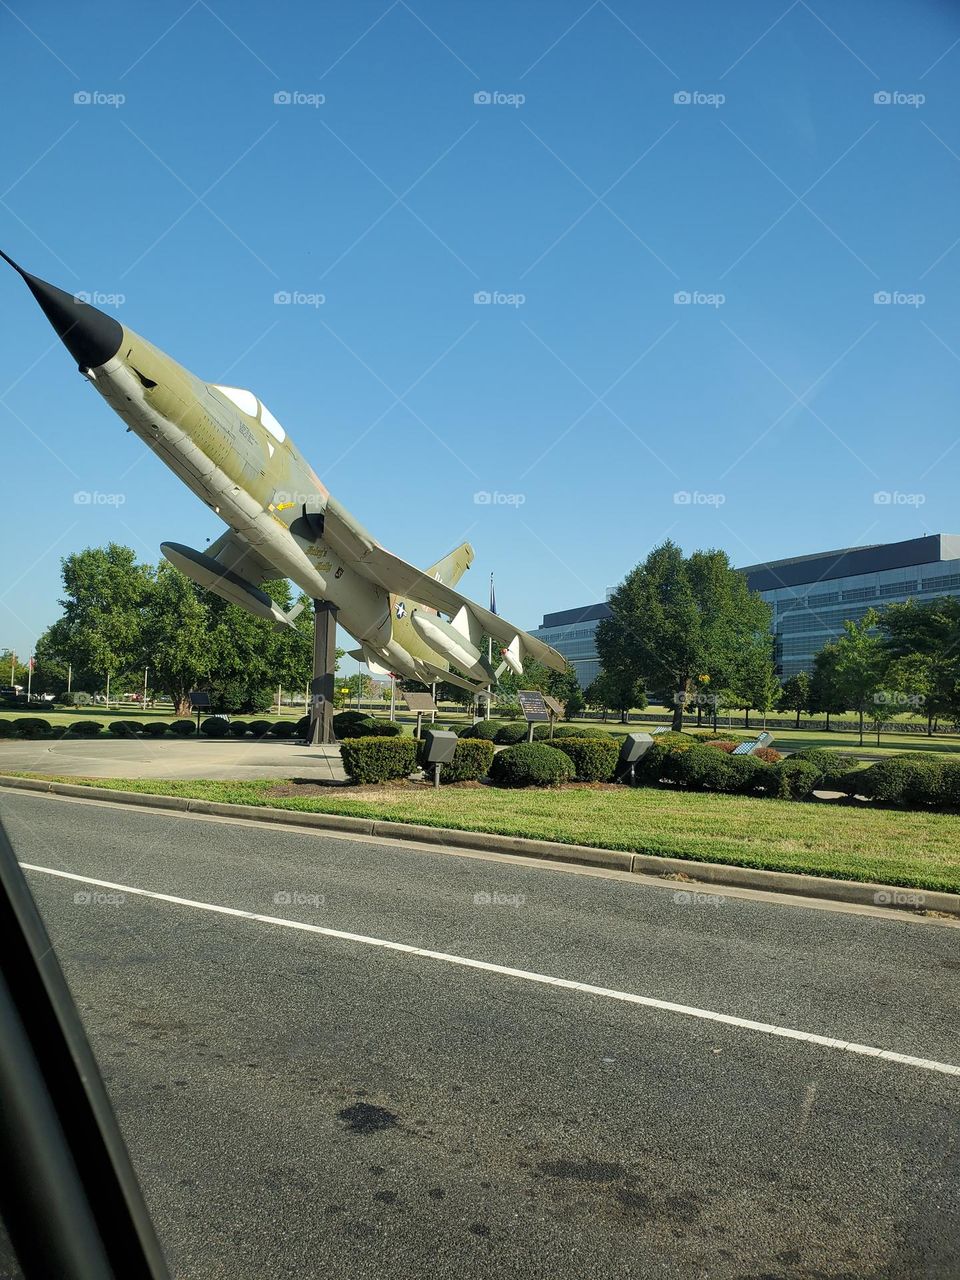 from the car window as you enter Bolling AFB we see an old Air Force jet on display